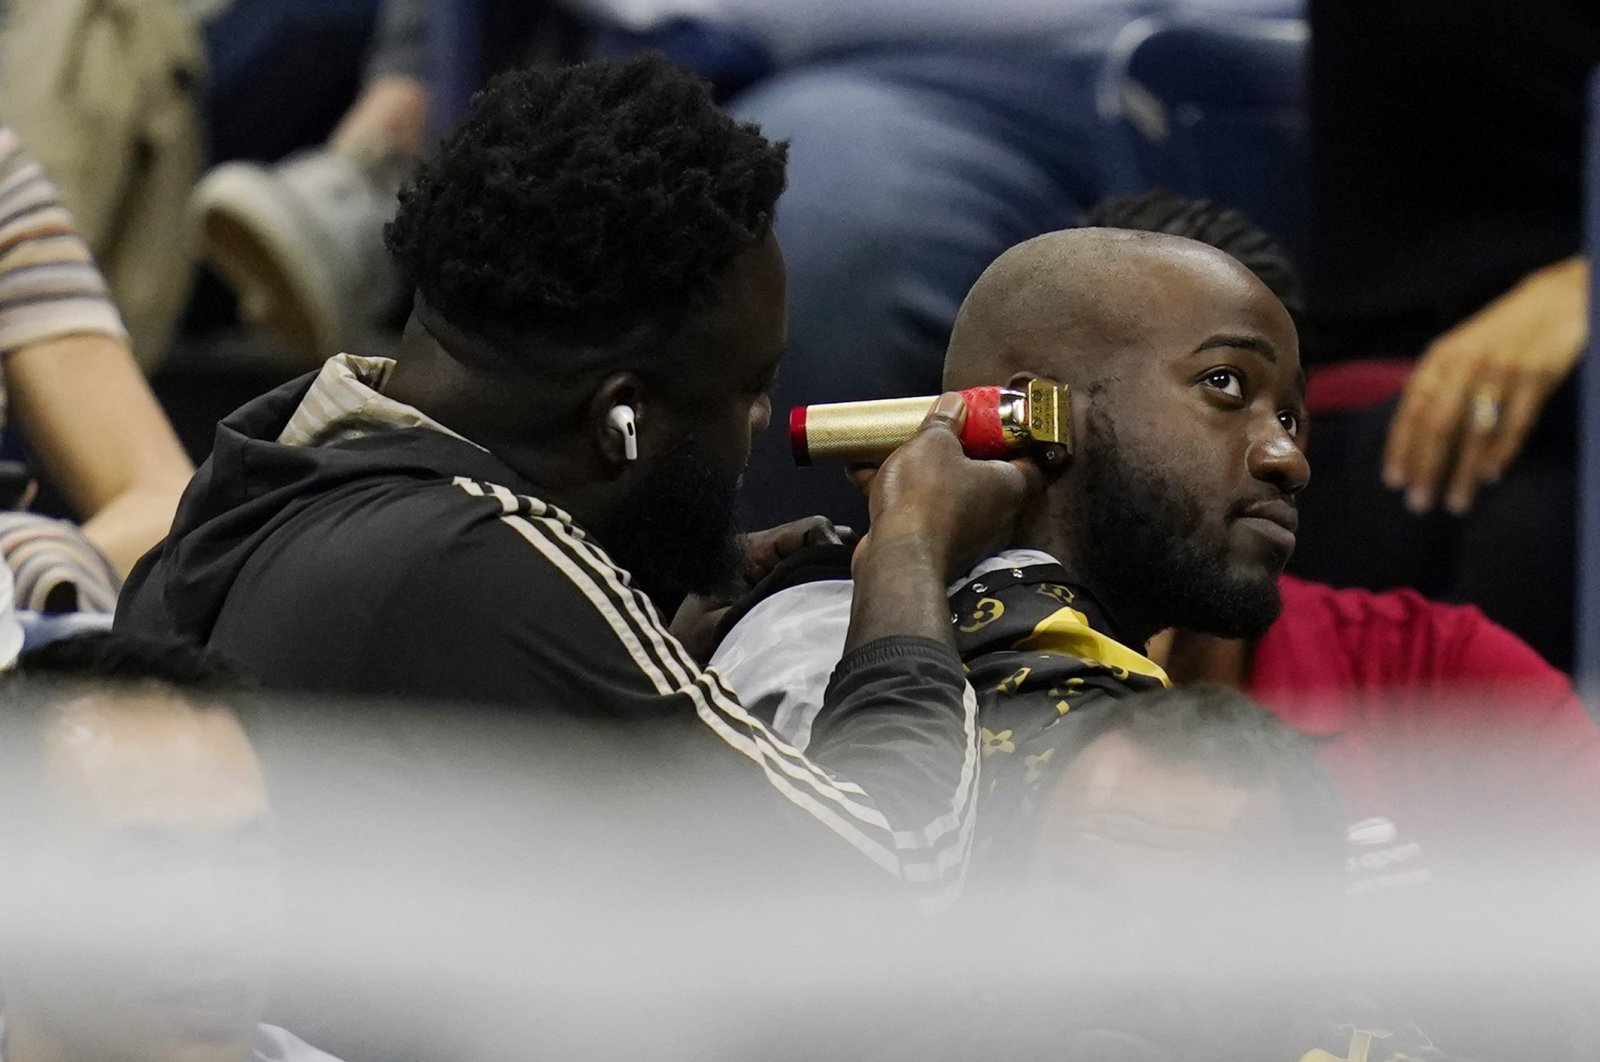 A fan gets a haircut in the stands during a U.S. Open quarterfinal, New York, U.S., Sept. 6, 2022. (AP Photo)